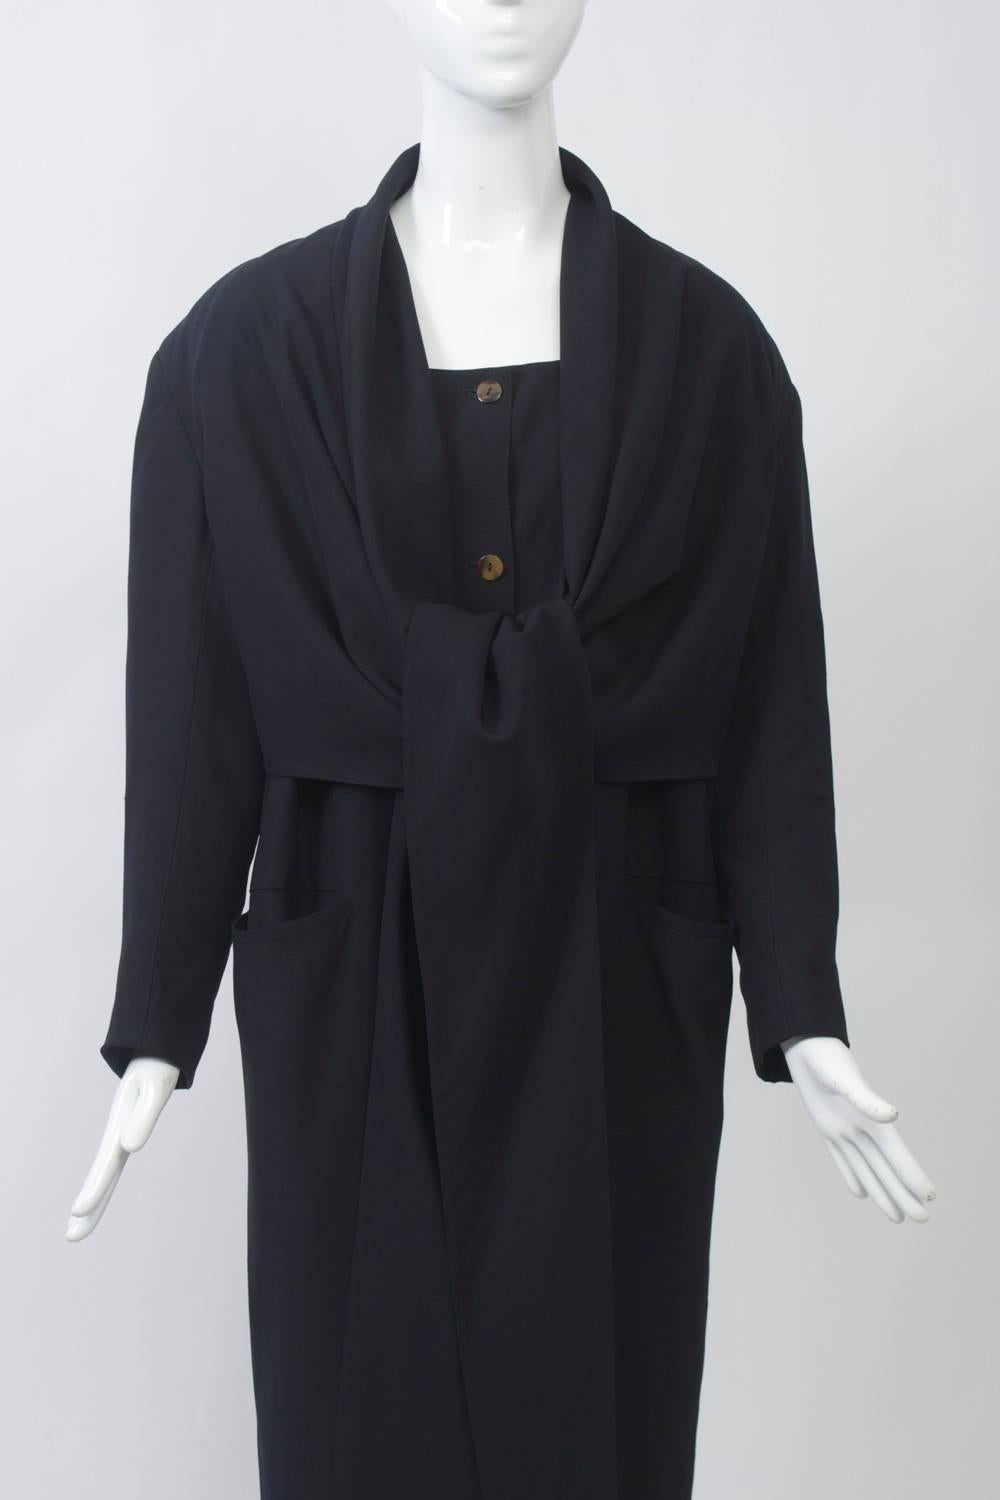 Button-down dress in dark navy gabardine that is distinguished by an attached cape with long, tapered ends that wraps crosswise in front and ties behind the back; it can also be worn in different configurations as shown. The dress features a high,